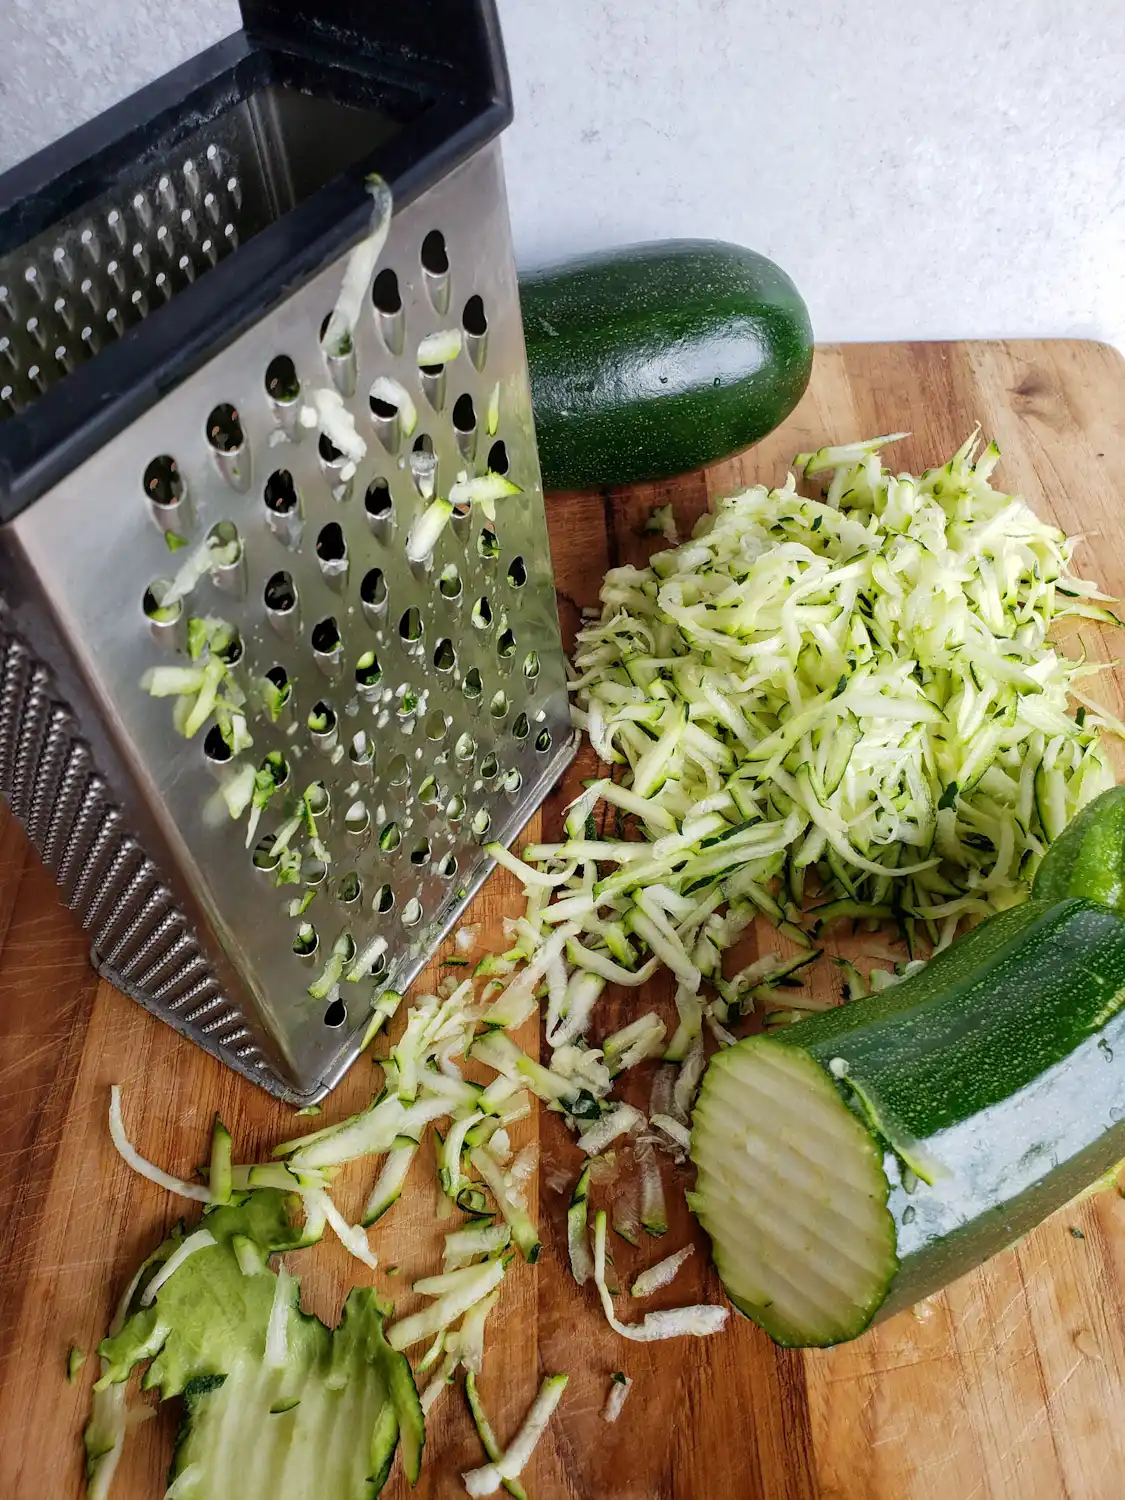 A close up image of a piece of squash that has been partially grated with a box grater. Another squash sits behind the grater with half of the squash poking out from behind. 